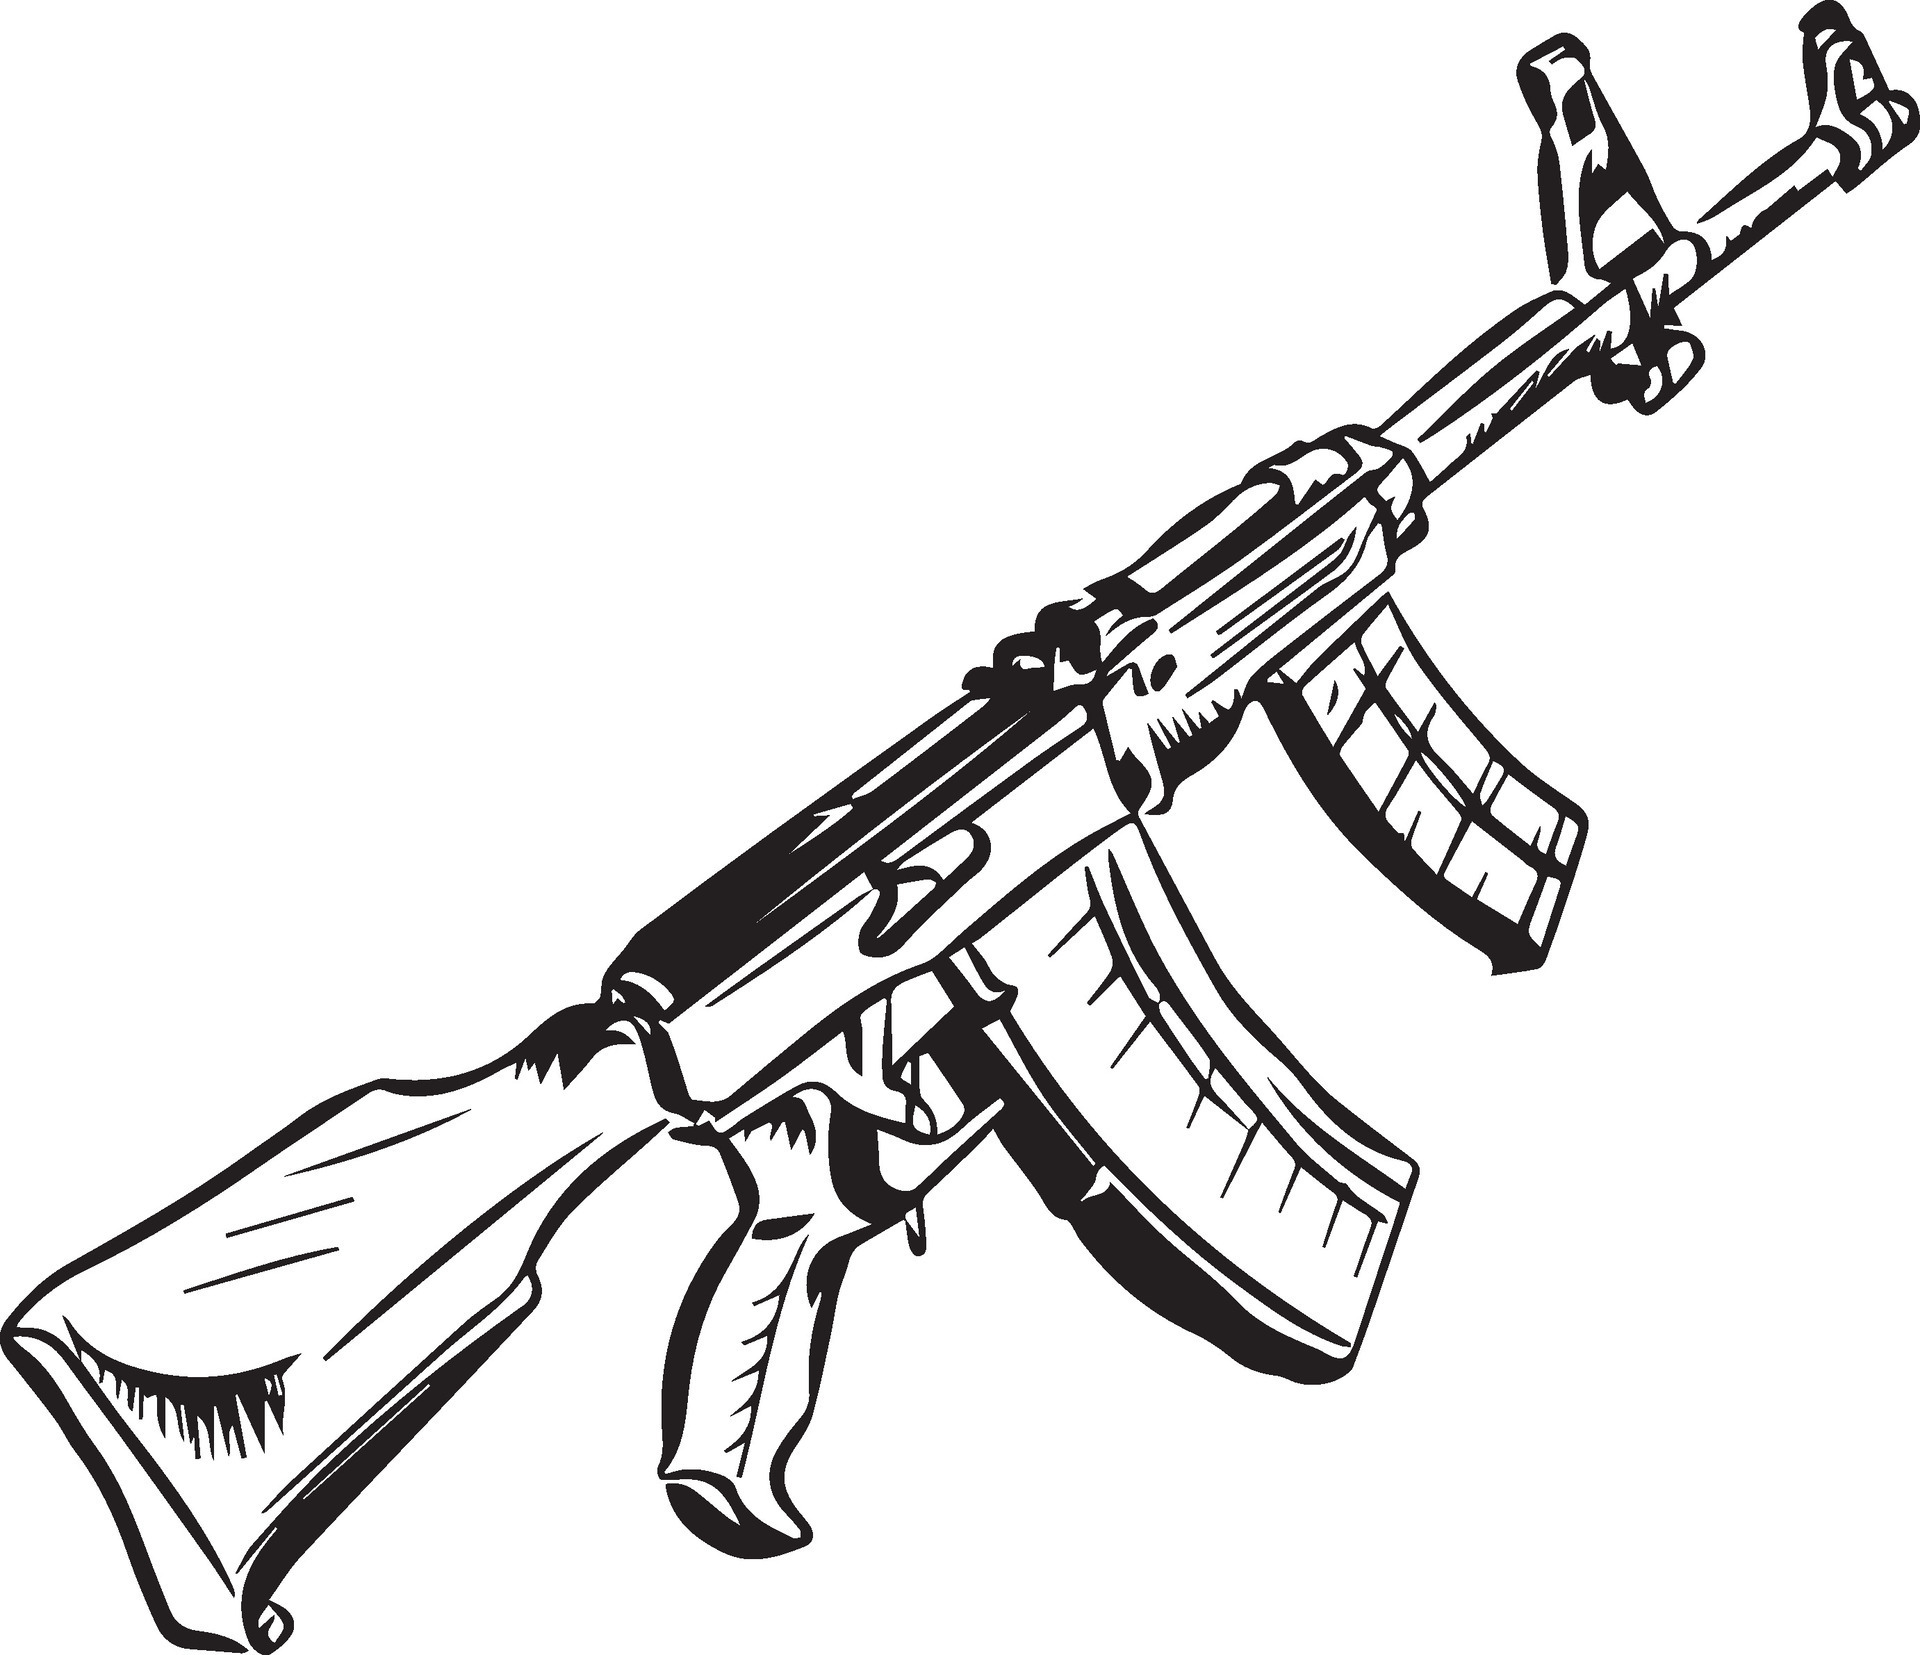 Reliability of the AK-47 - the most important reasons - Zbrojownia Modlin